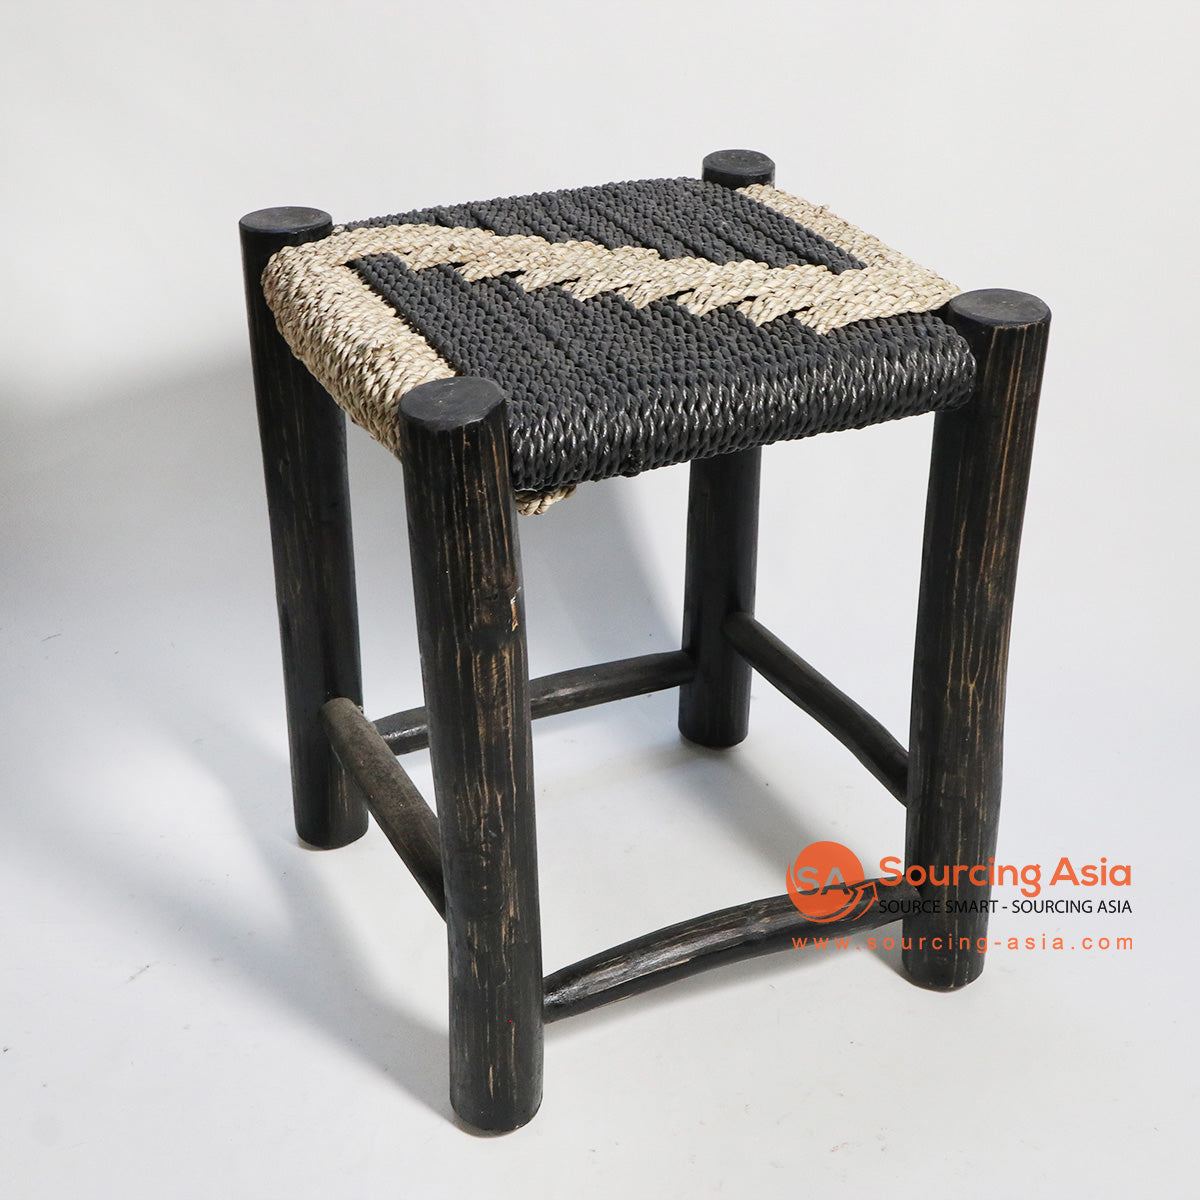 HBSC164 BLACK AND WHITE SEAGRASS SQUARE STOOL